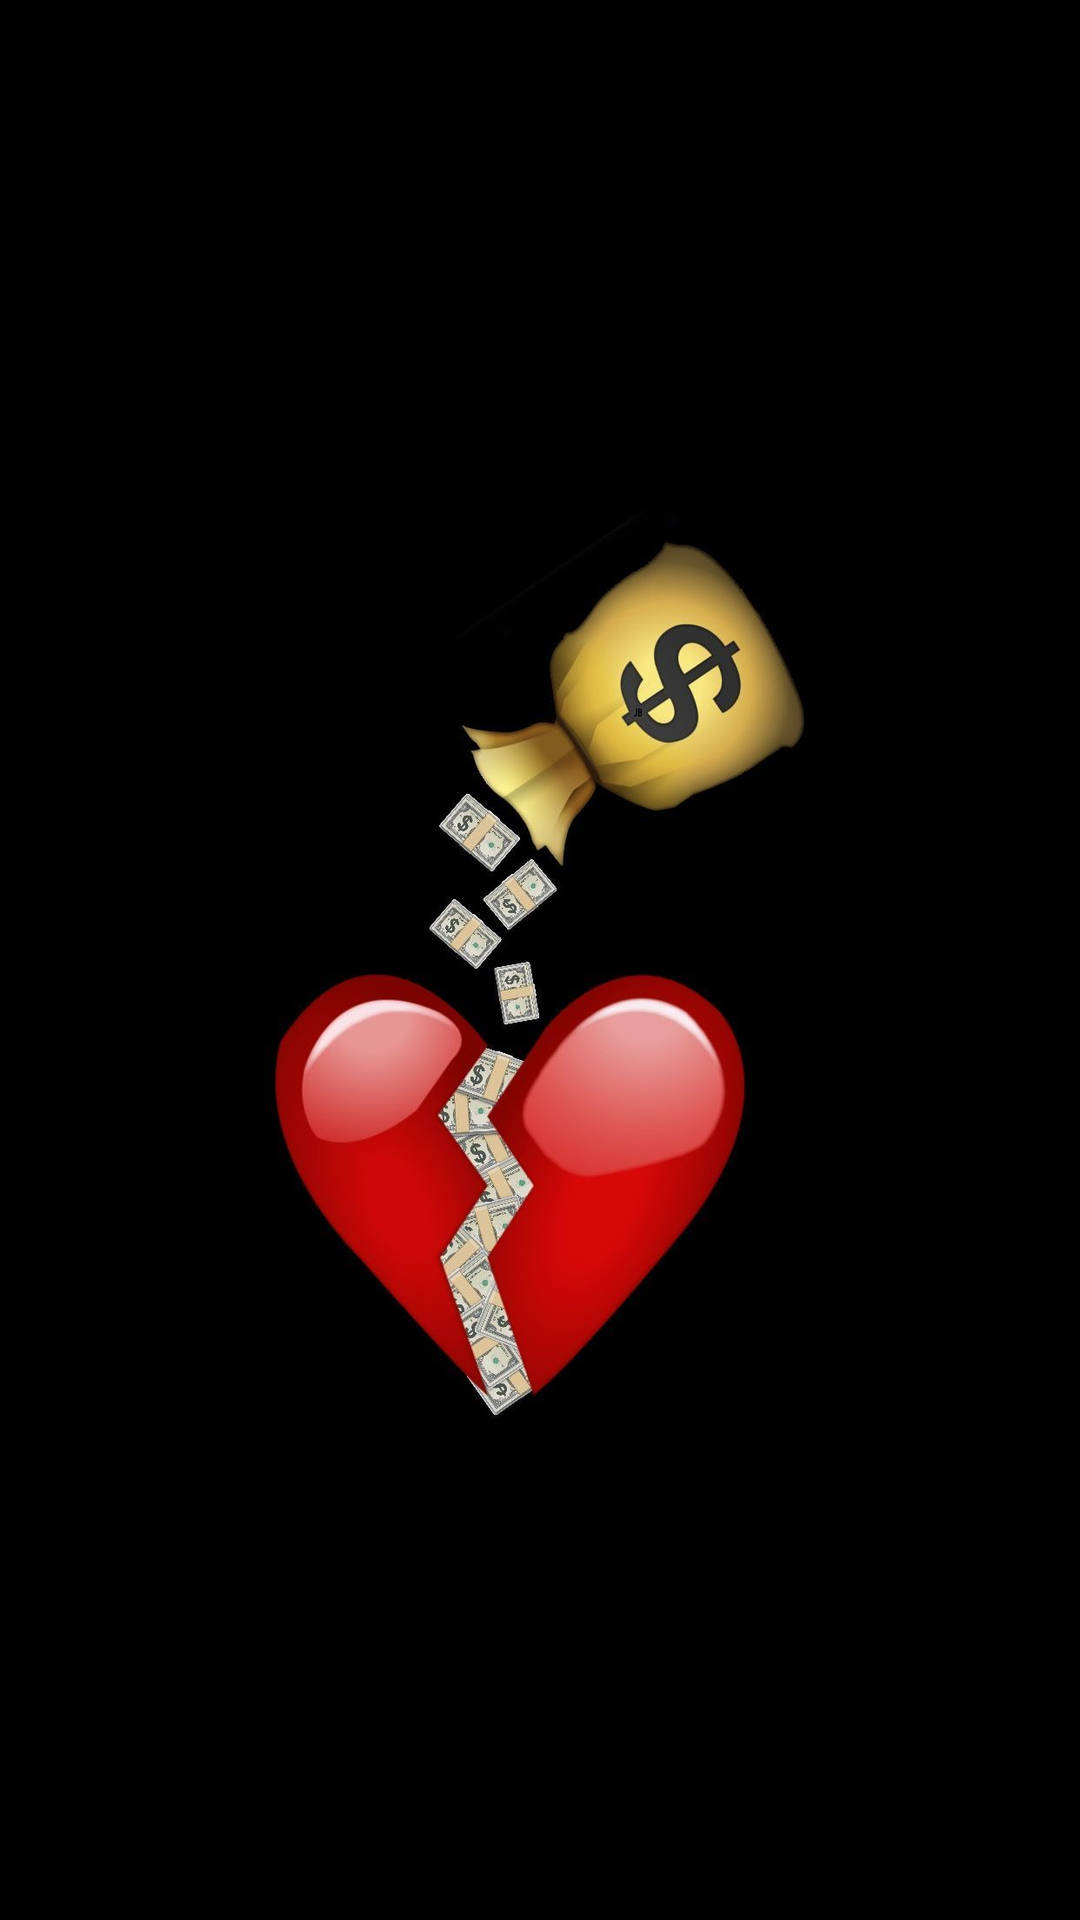 A Striking Depiction of a Broken Heart Surrounded by Dollar Notes Wallpaper